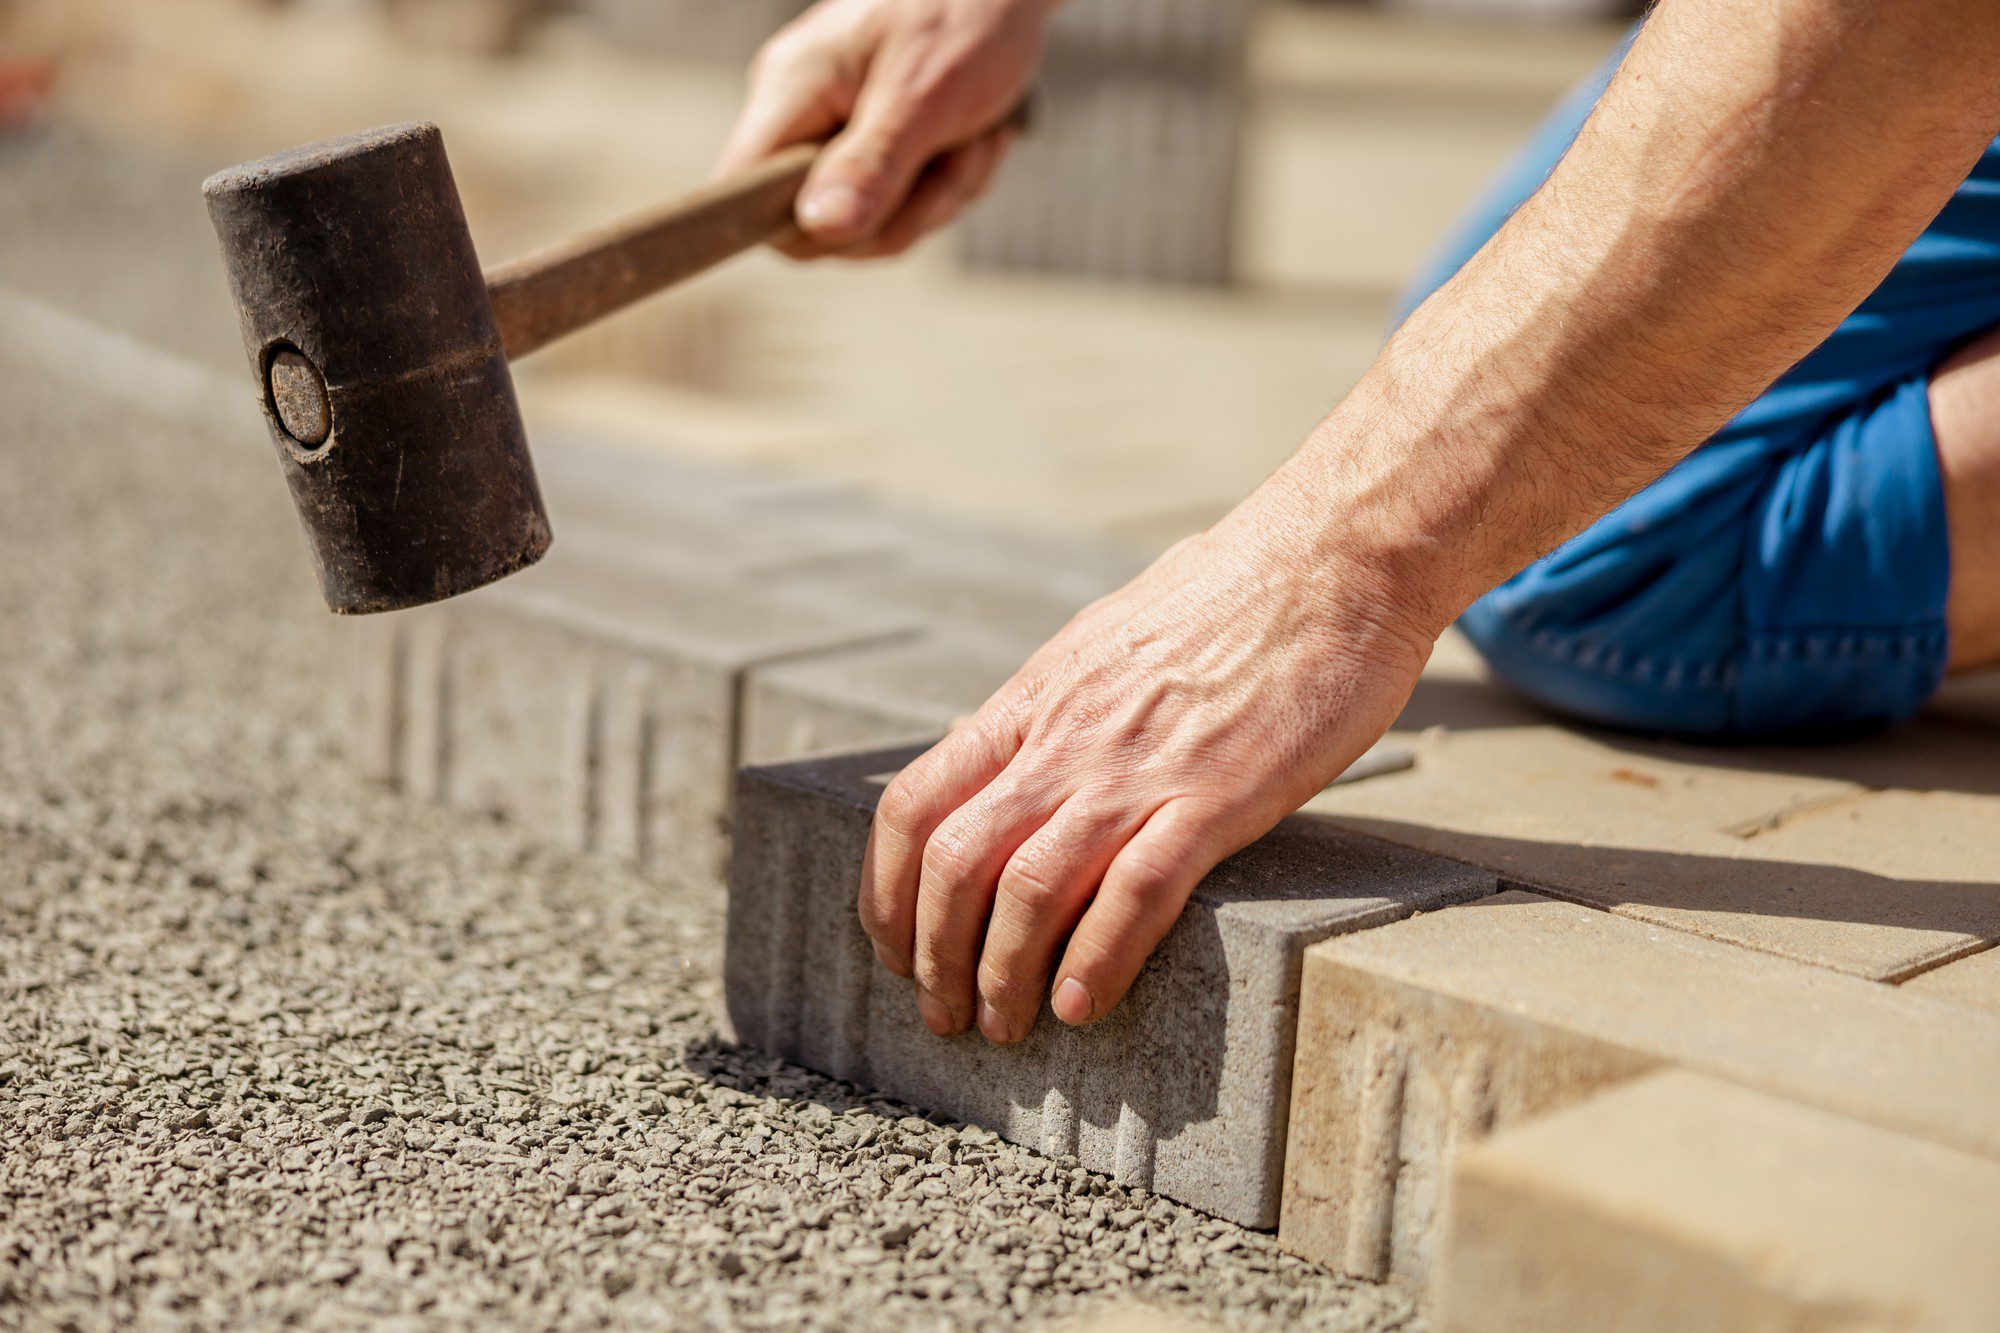 The image shows a close-up of a person laying paving stones. The person is using a rubber mallet to tap a paving stone into place on a bed of what appears to be a granular base, like sand or fine gravel. The person is wearing a short sleeve shirt and shorts, indicative of warm weather or outdoor working conditions. The focus is on the person's hands and the mallet, with the foreground and background slightly blurred to emphasize the action. This suggests the person is engaging in some kind of construction or landscaping work.